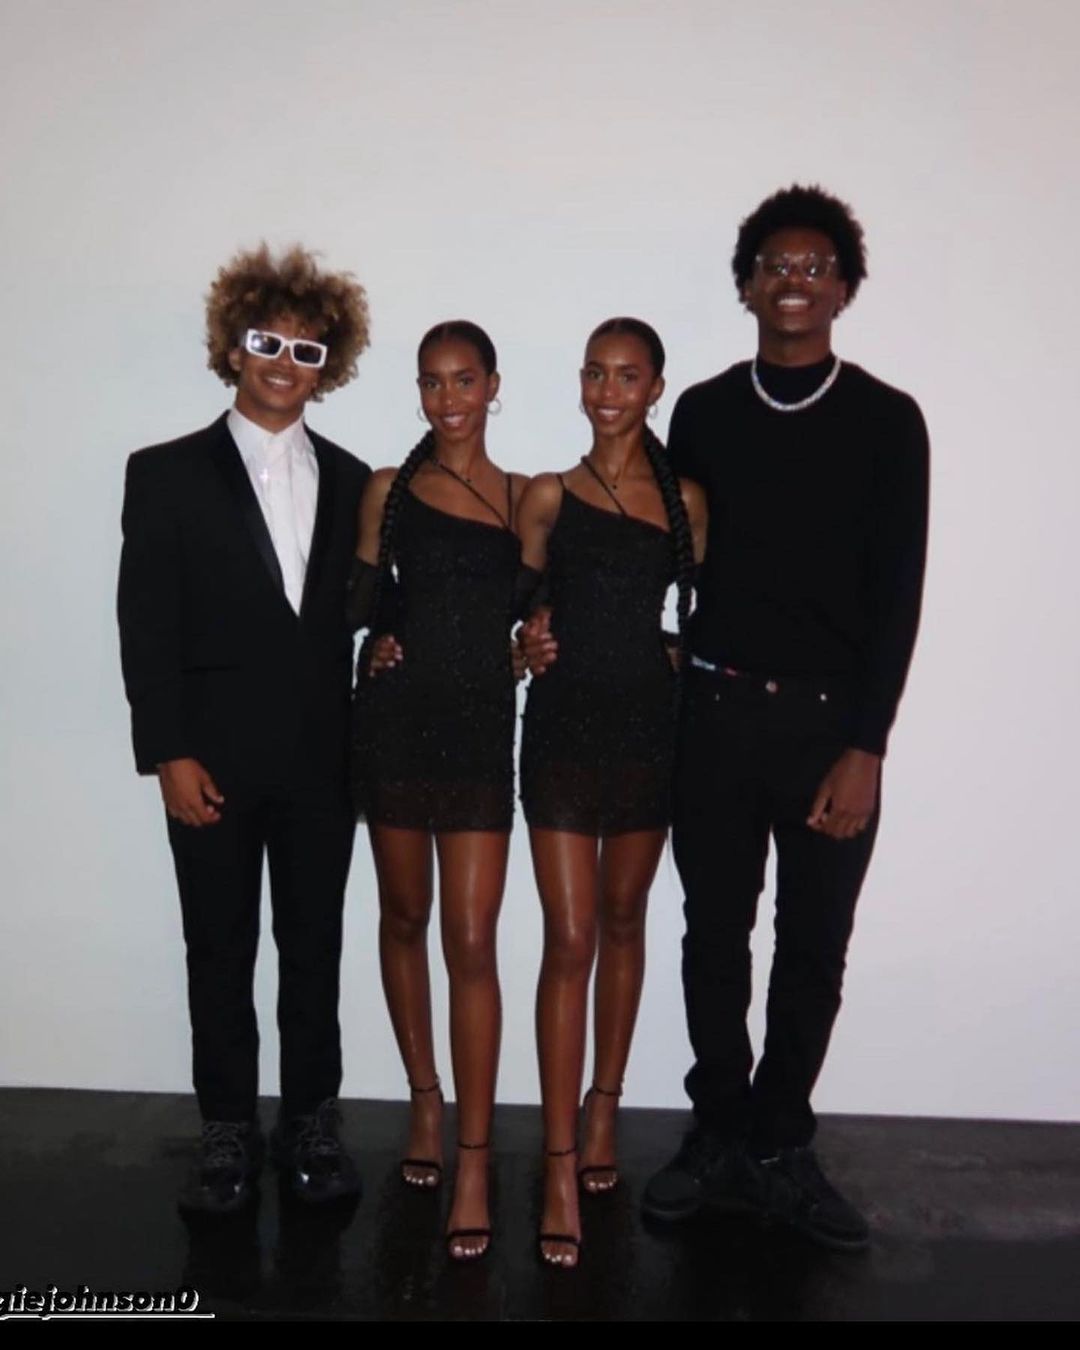 ICYMI: The Combs Twins Went To Homecoming With LeBron James' Son And Their School's Star Quarterback